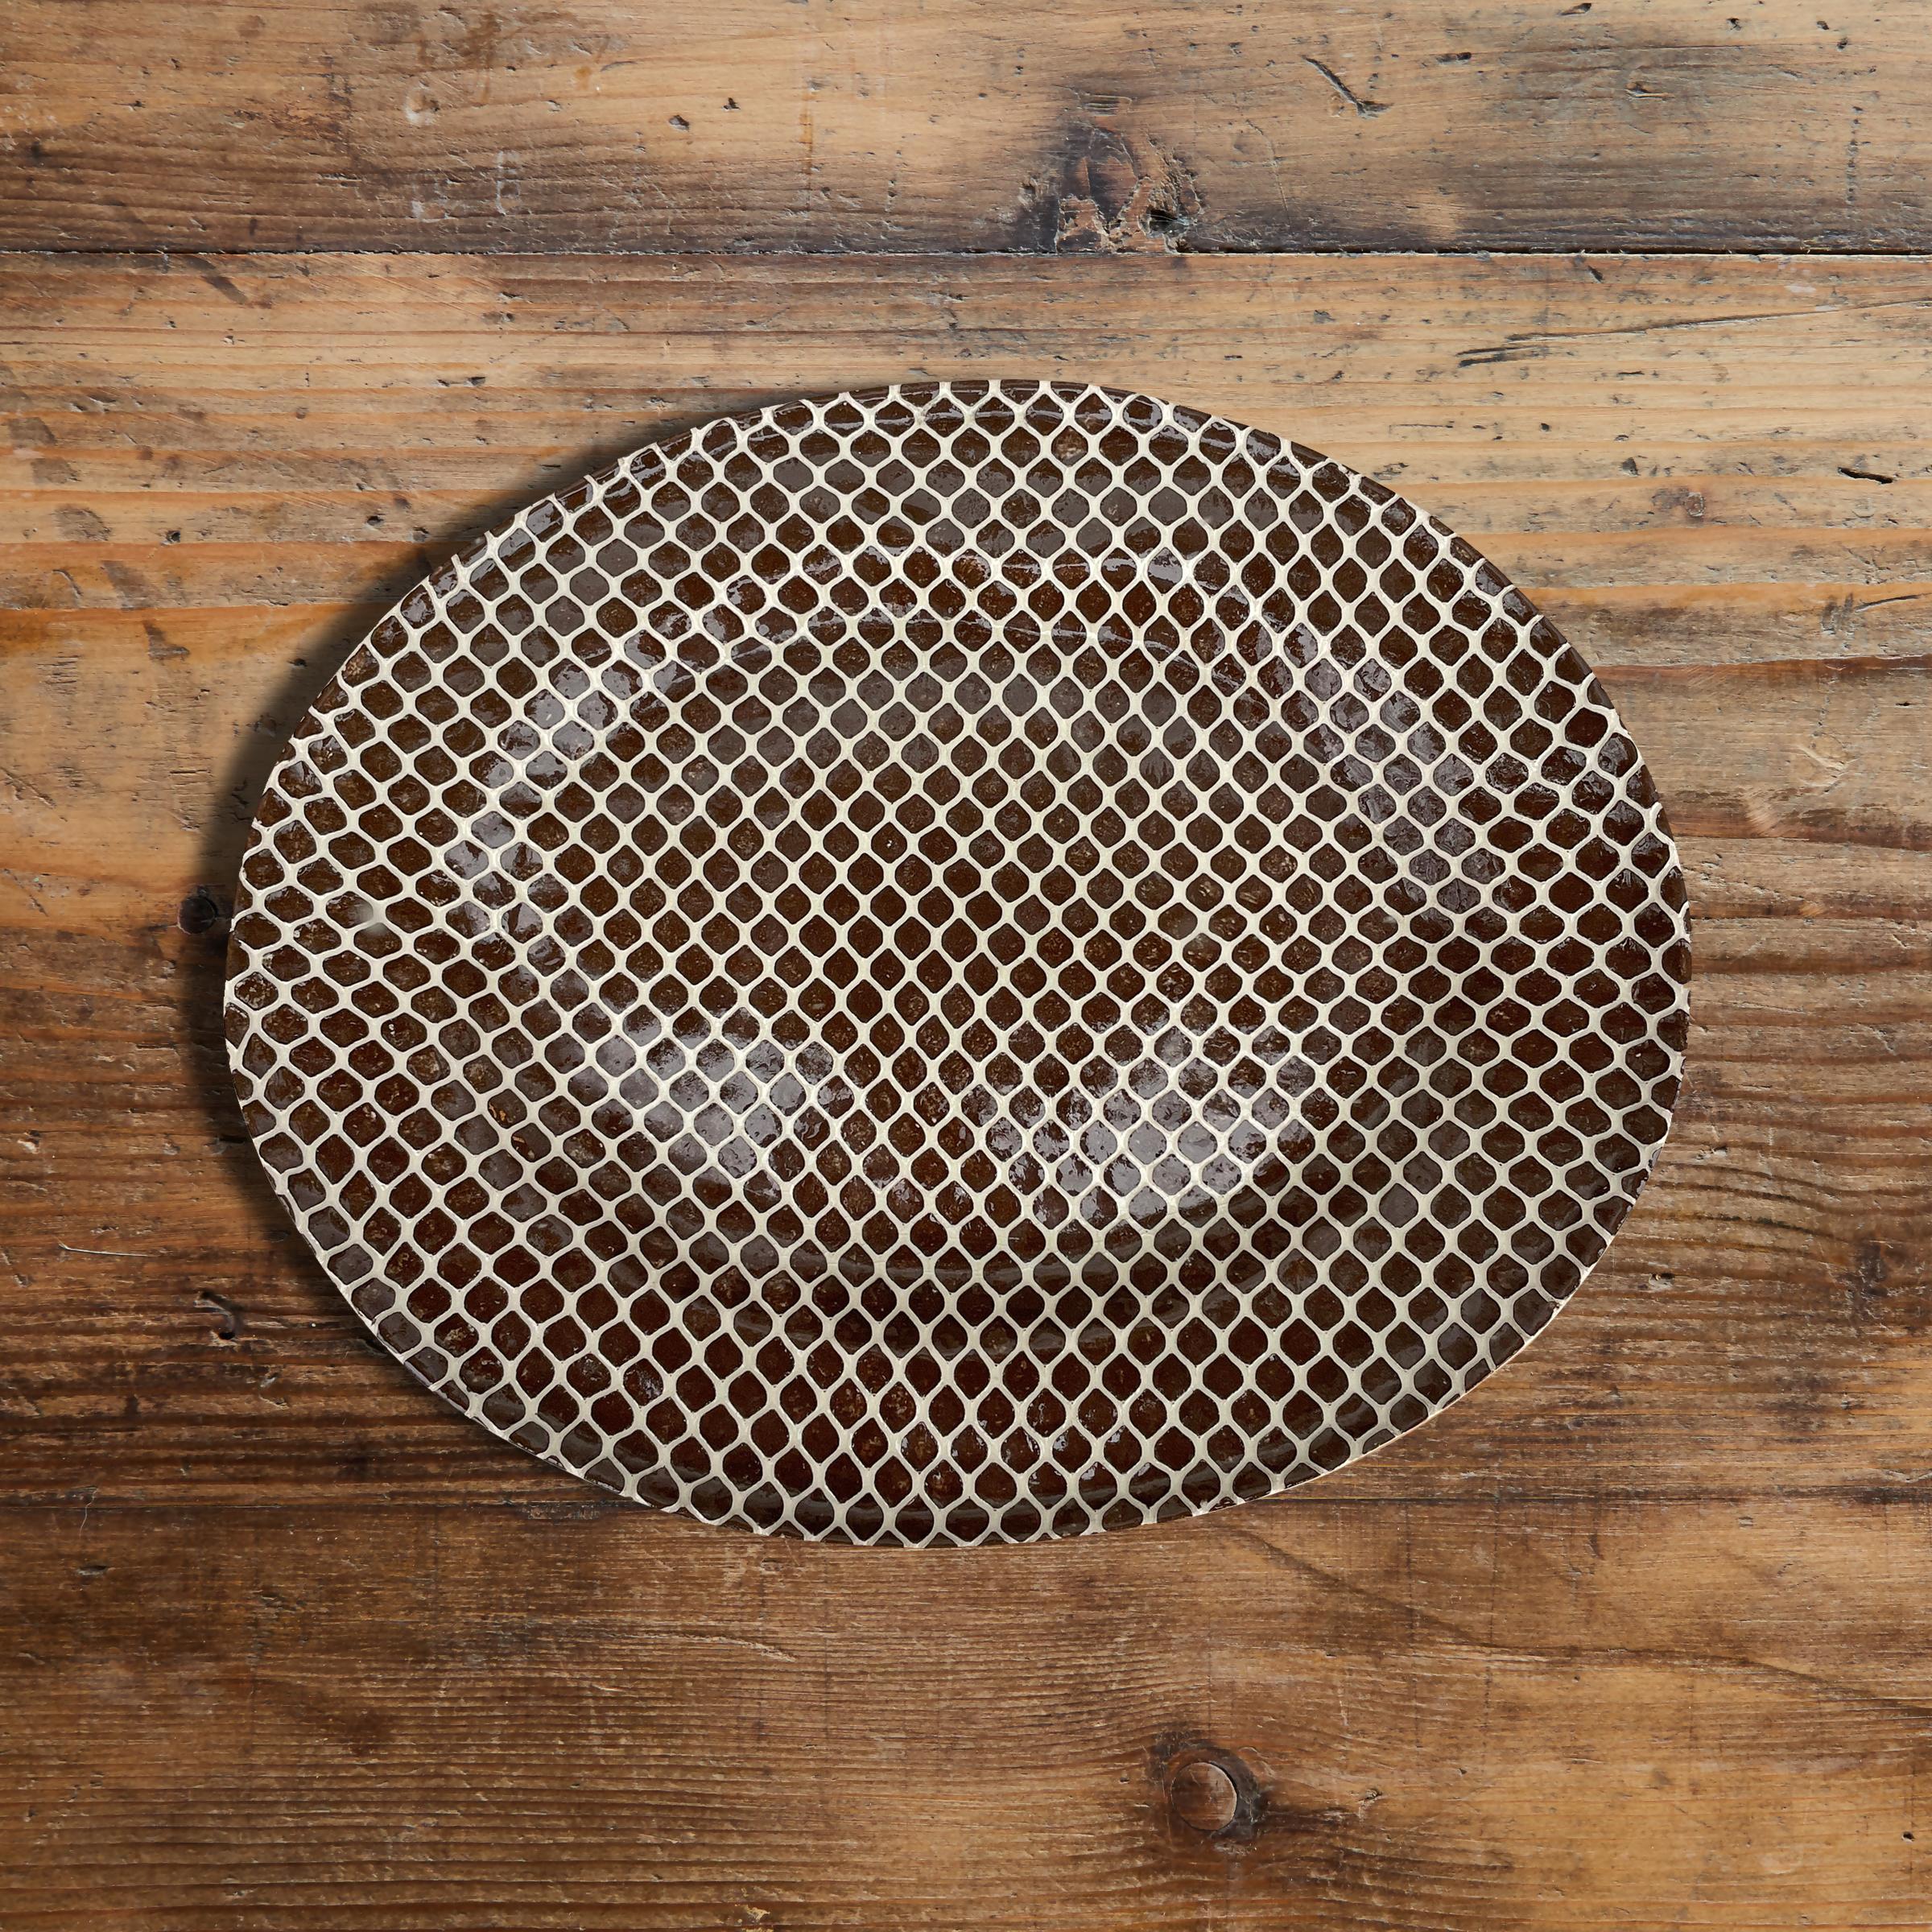 A striking large hand-built Studio Pottery platter with an imprinted pattern and glazed in brown and white. Signed illegibly on the bottom, and dated 2016.